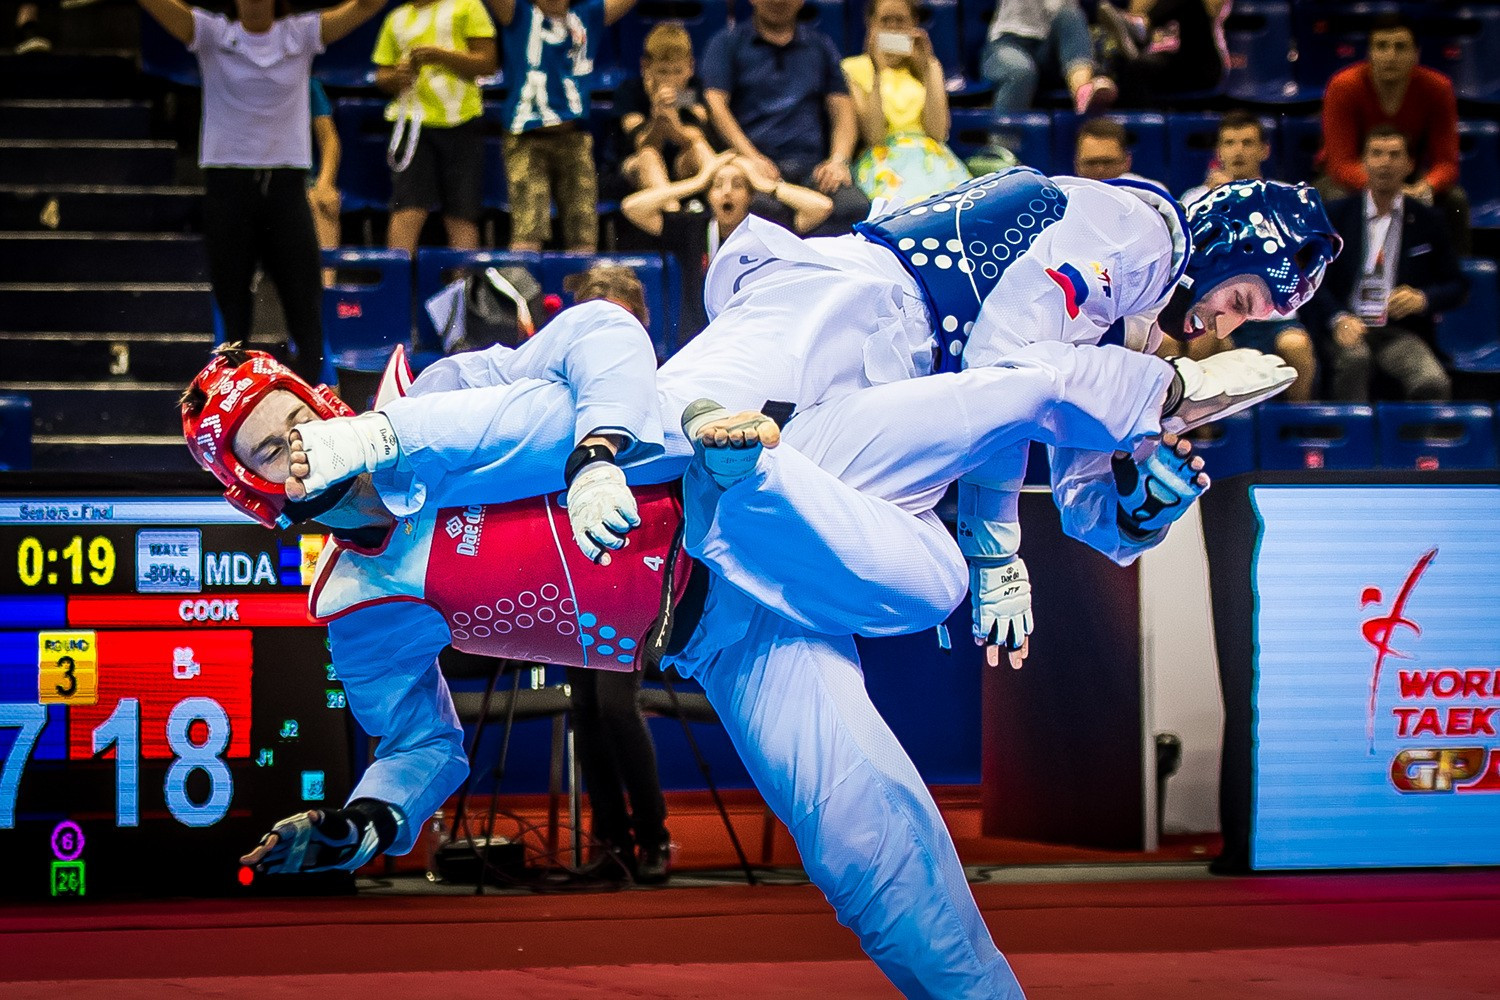 The final between Anton Kotkov and Aaron Cook proved to be a thrilling affair ©World Taekwondo